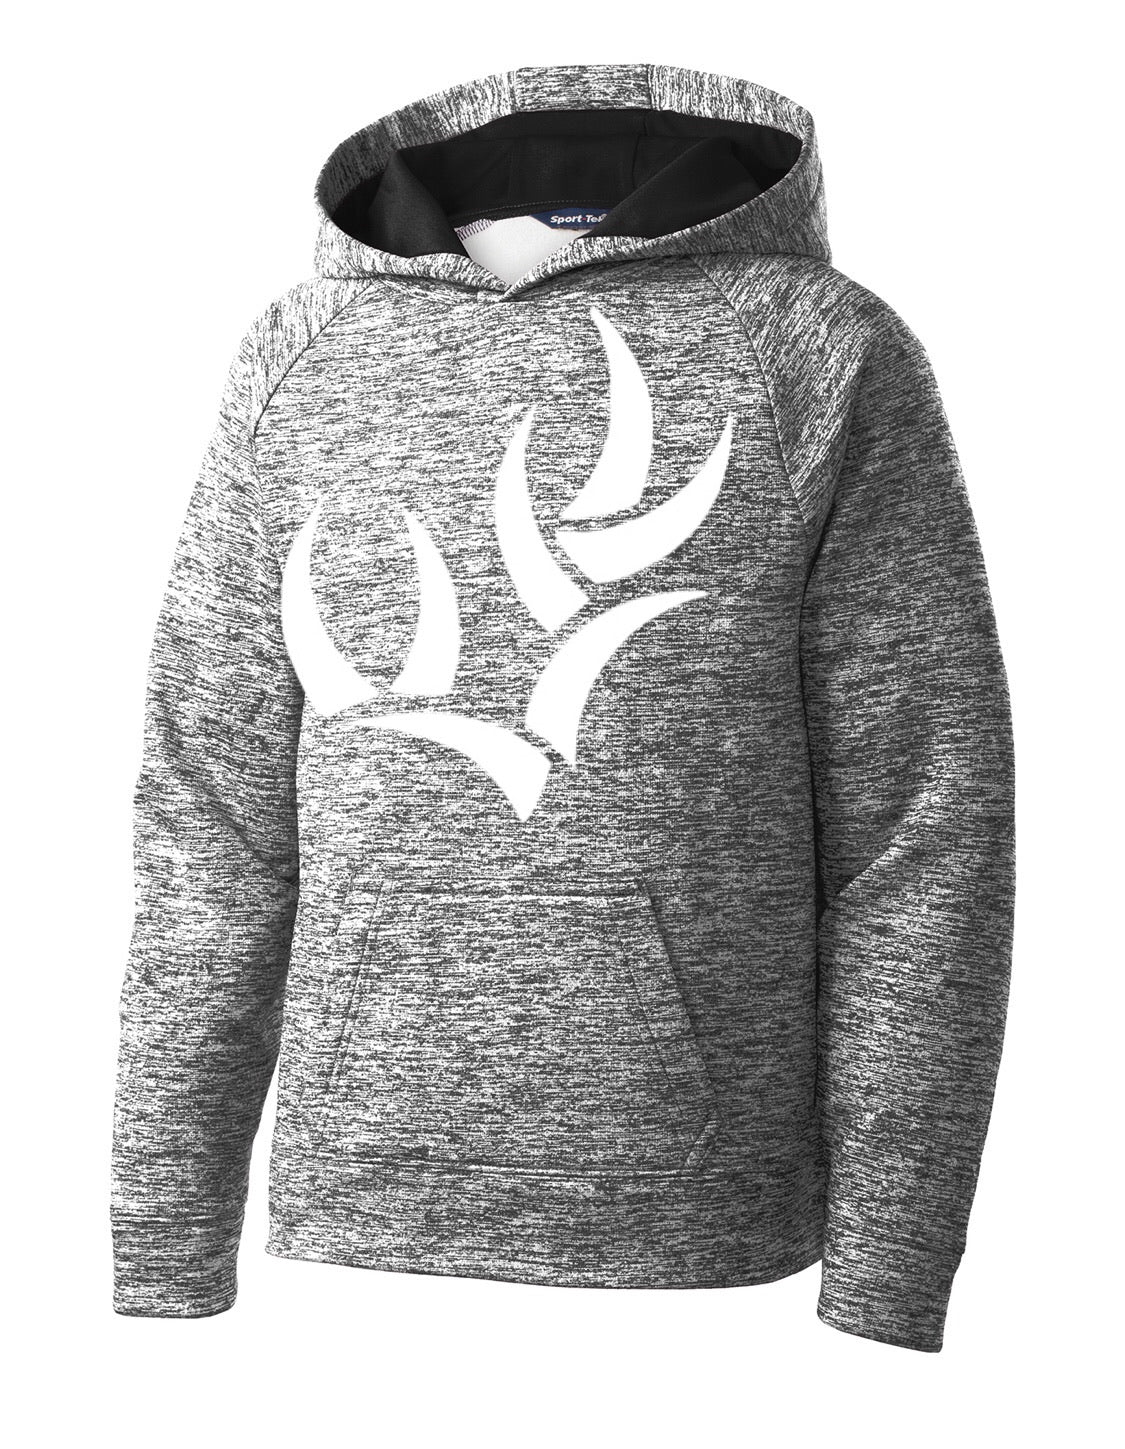 SPORT-TEK® YOUTH POSICHARGE® ELECTRIC HEATHER FLEECE HOODED PULLOVER